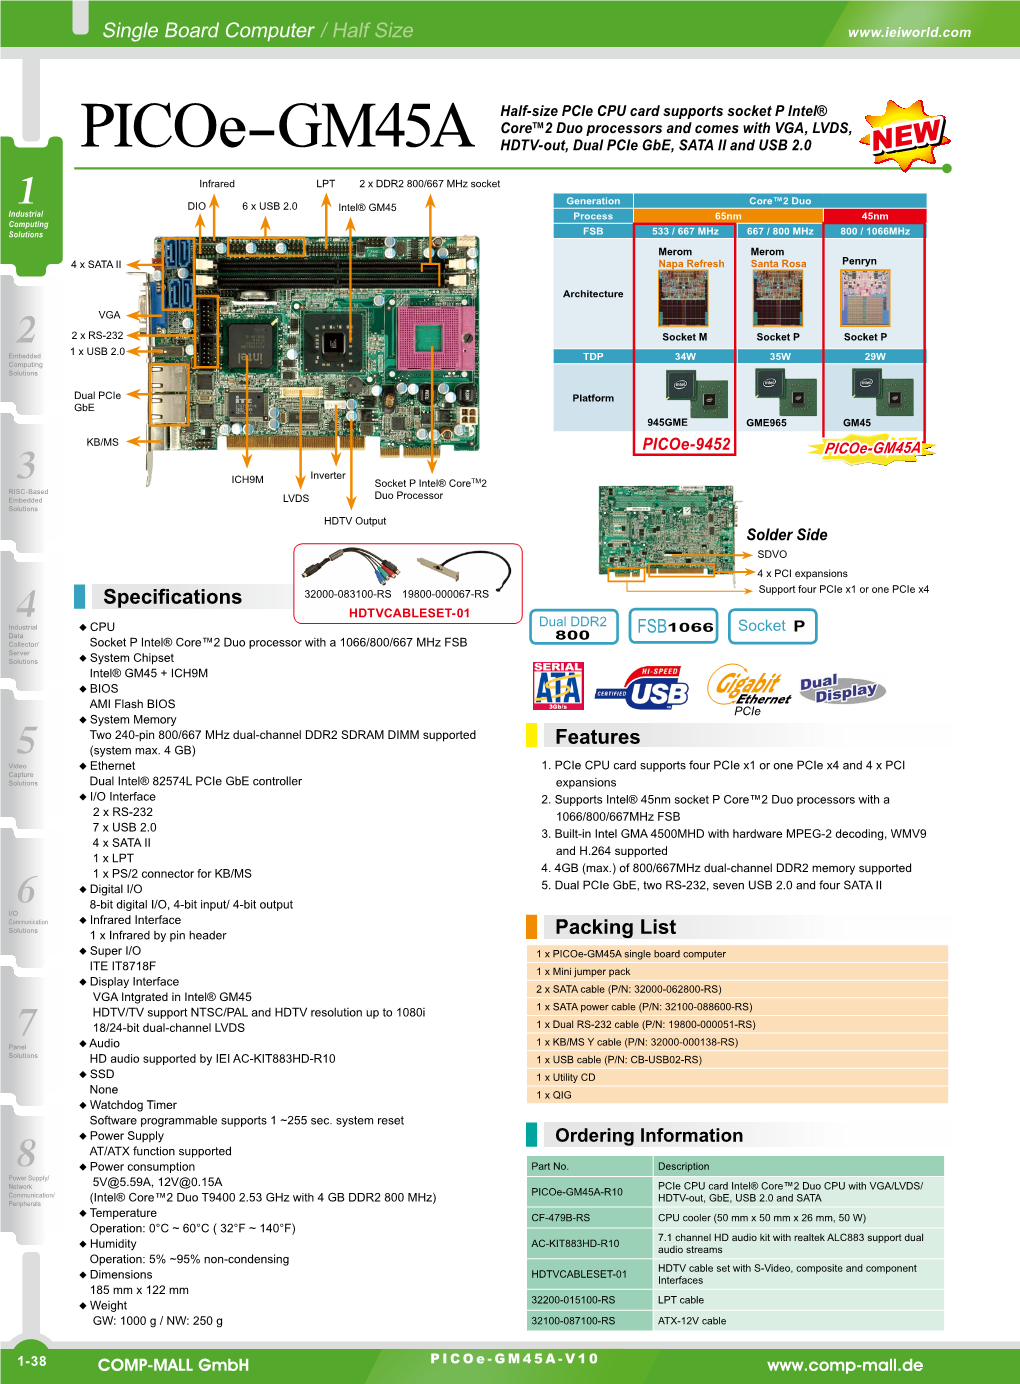 Single Board Computer / Half Size Specifications Features Packing List